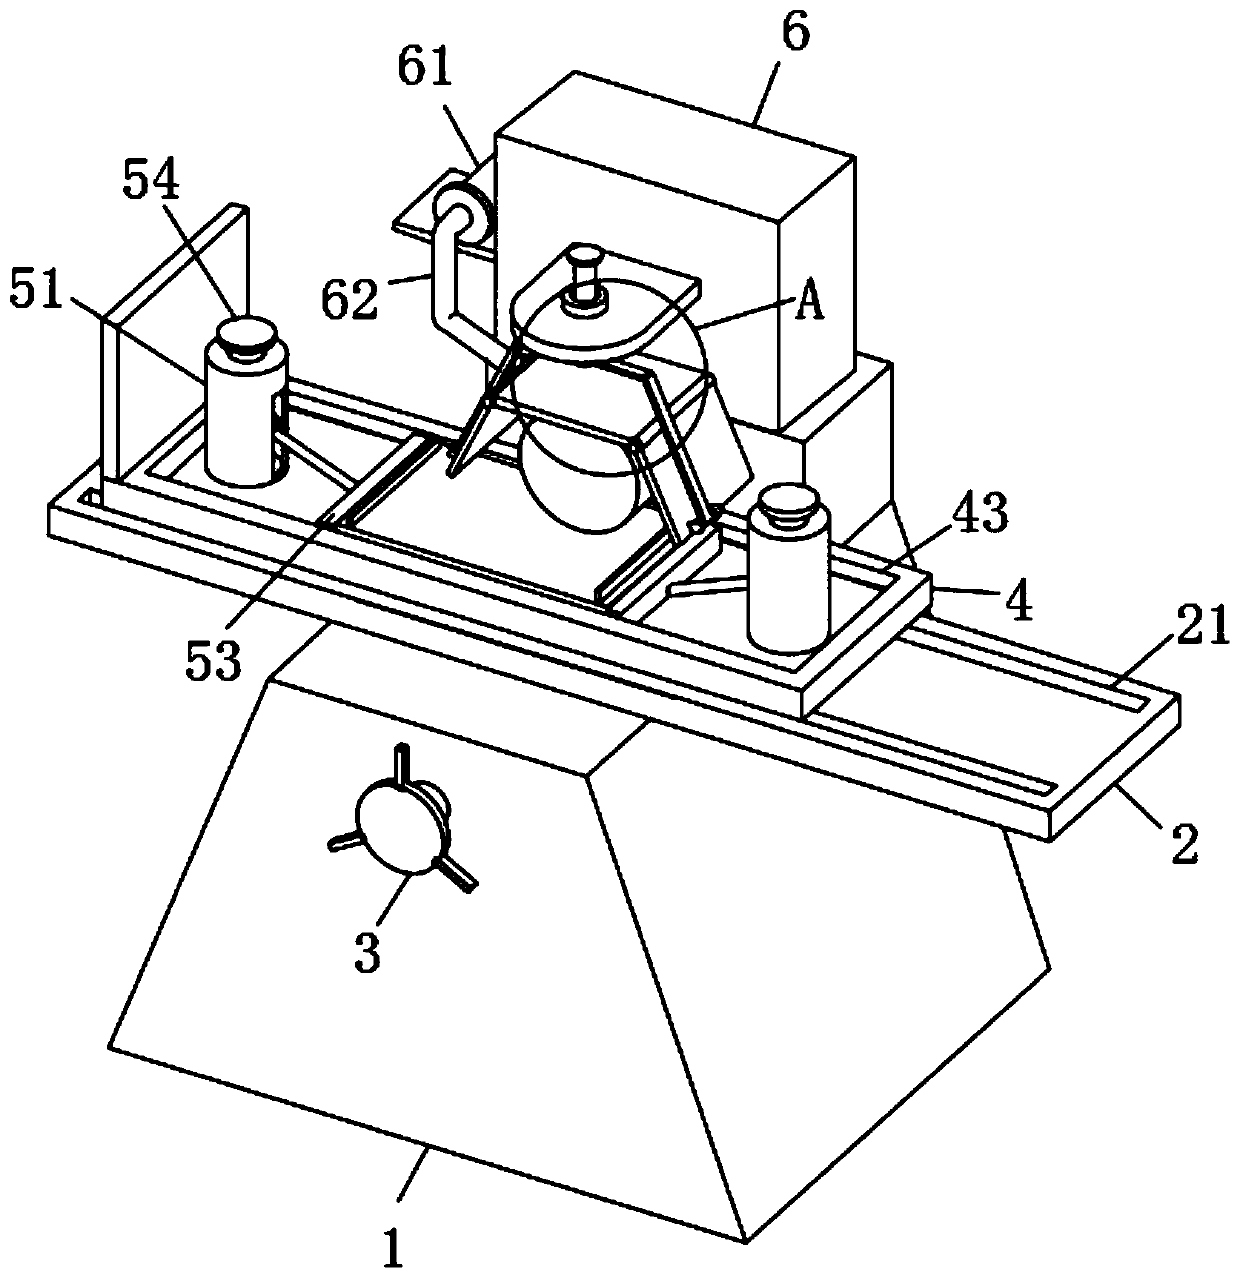 Grinding machine with positioning device for preventing sweeps from splashing